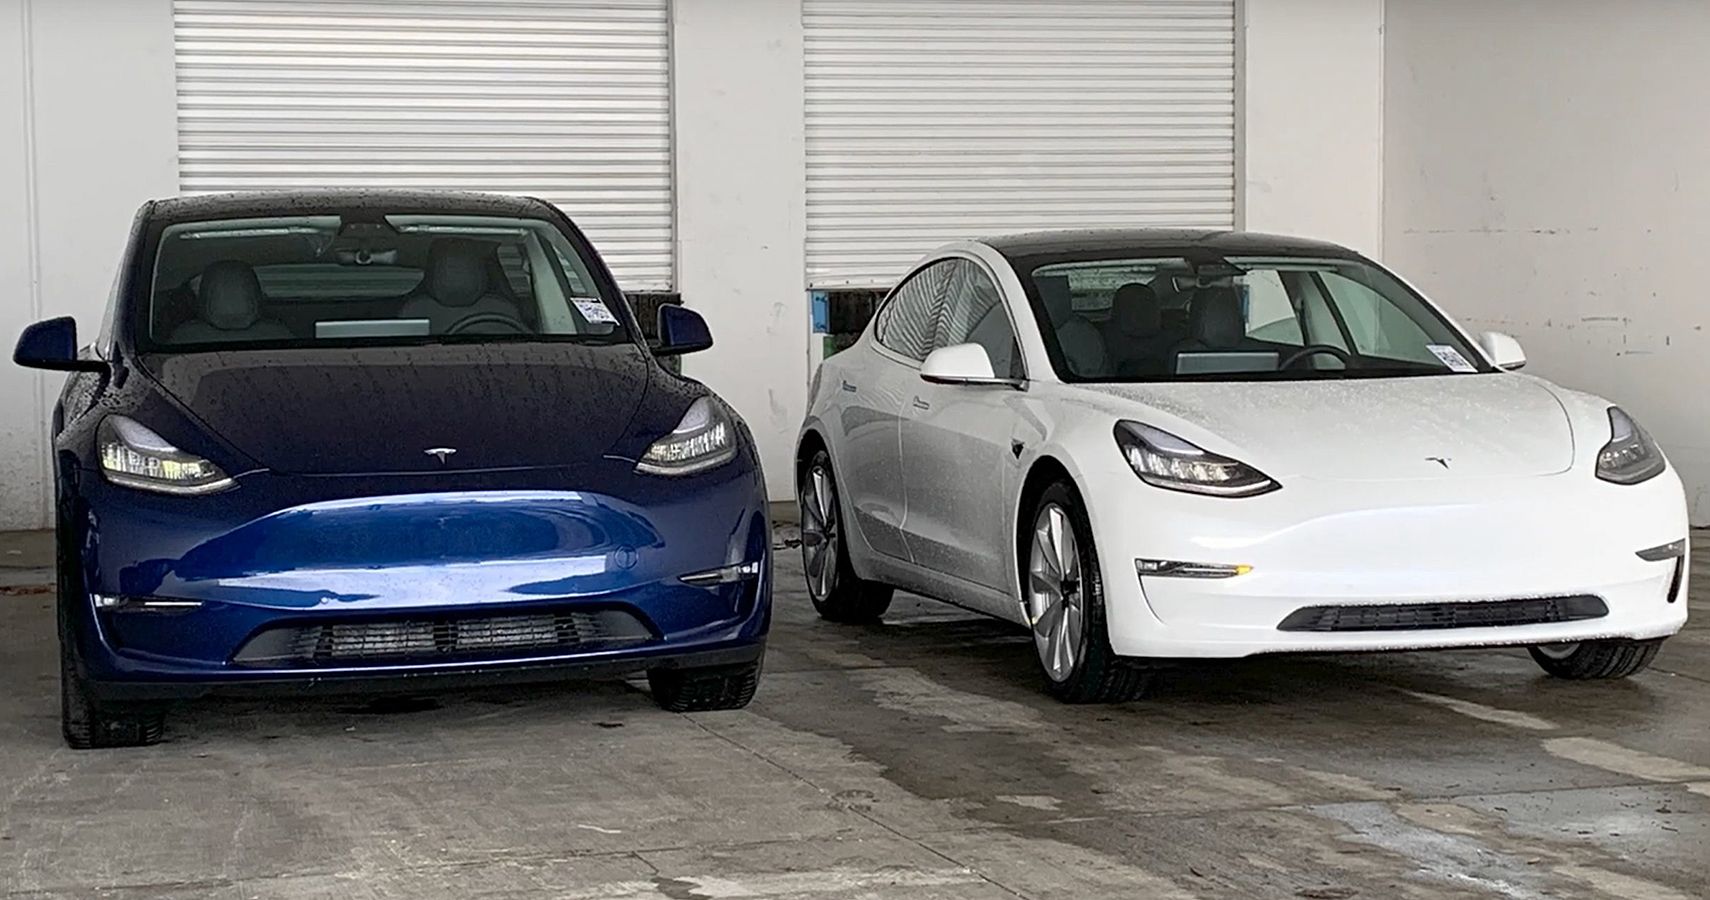 Model Y Could Cannibalize The Sales Of The Model 3